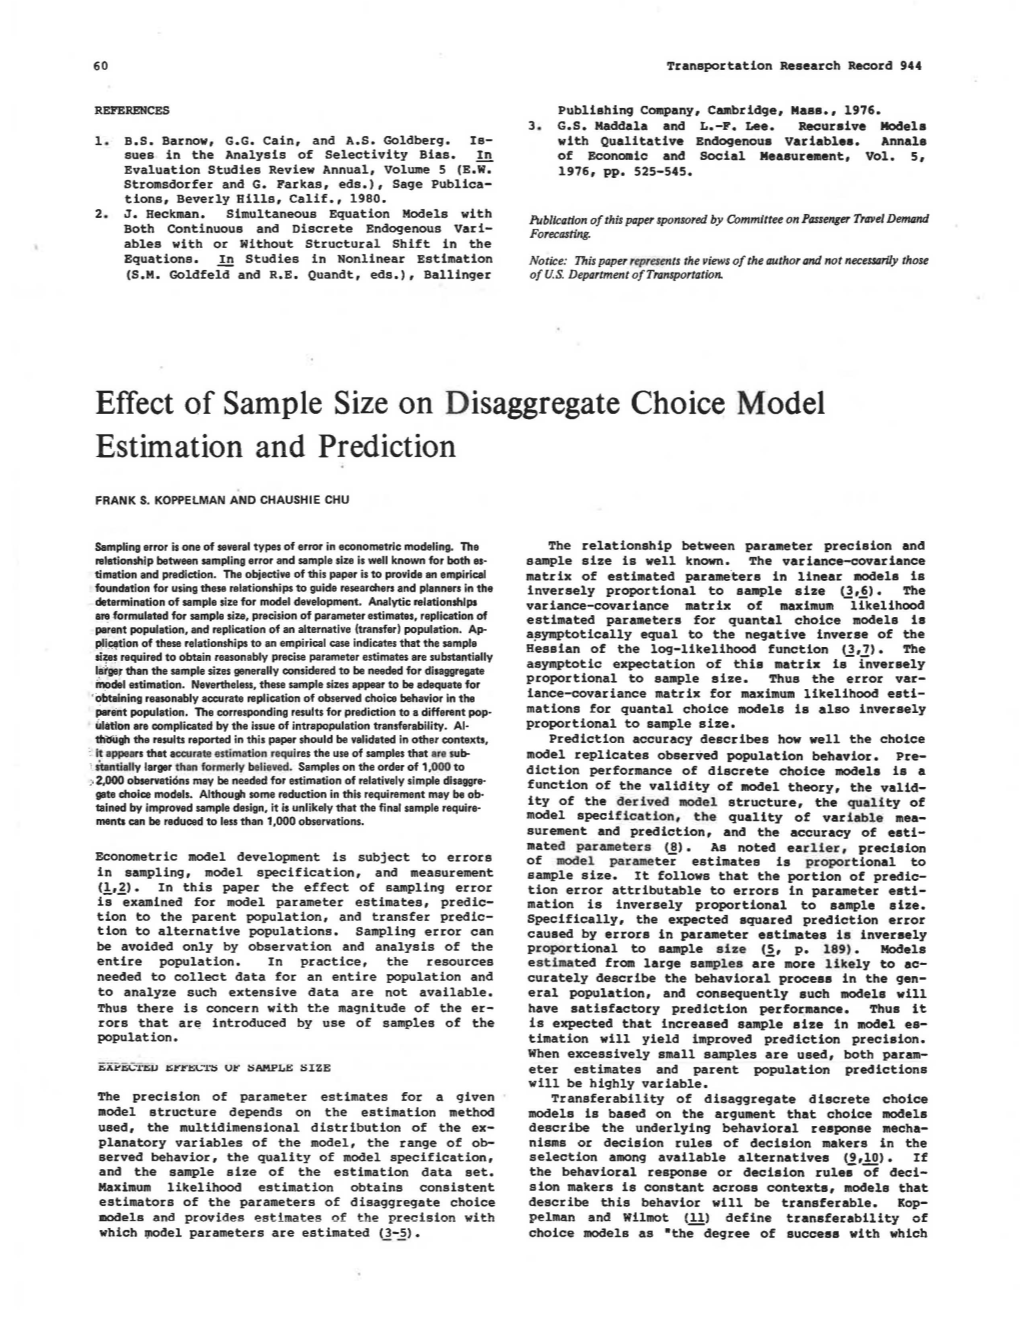 Effect of Sample Size on Disaggregate Choice Model Estimation and Prediction